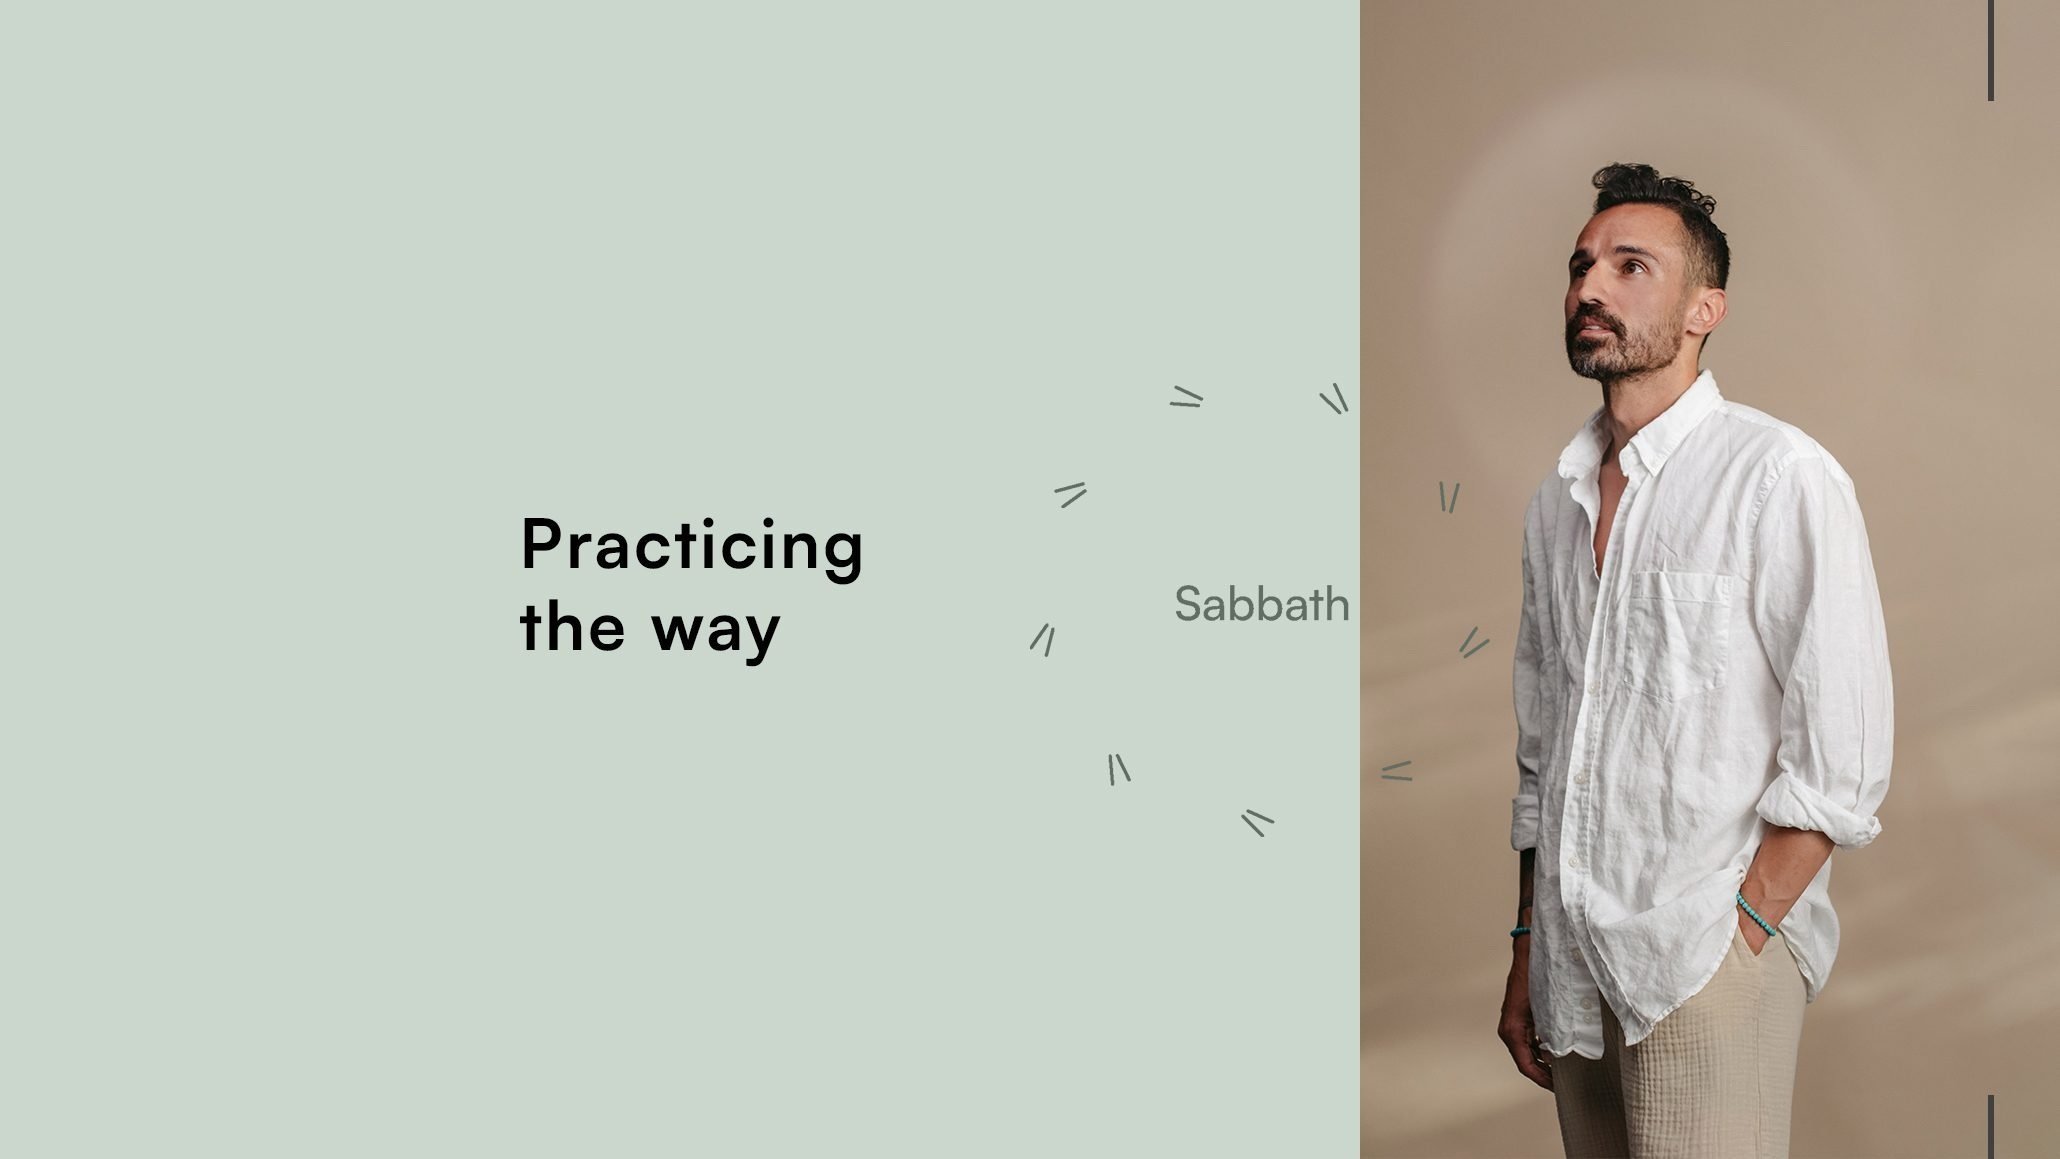 A 4 week course looking at the spiritual practice of Sabbath